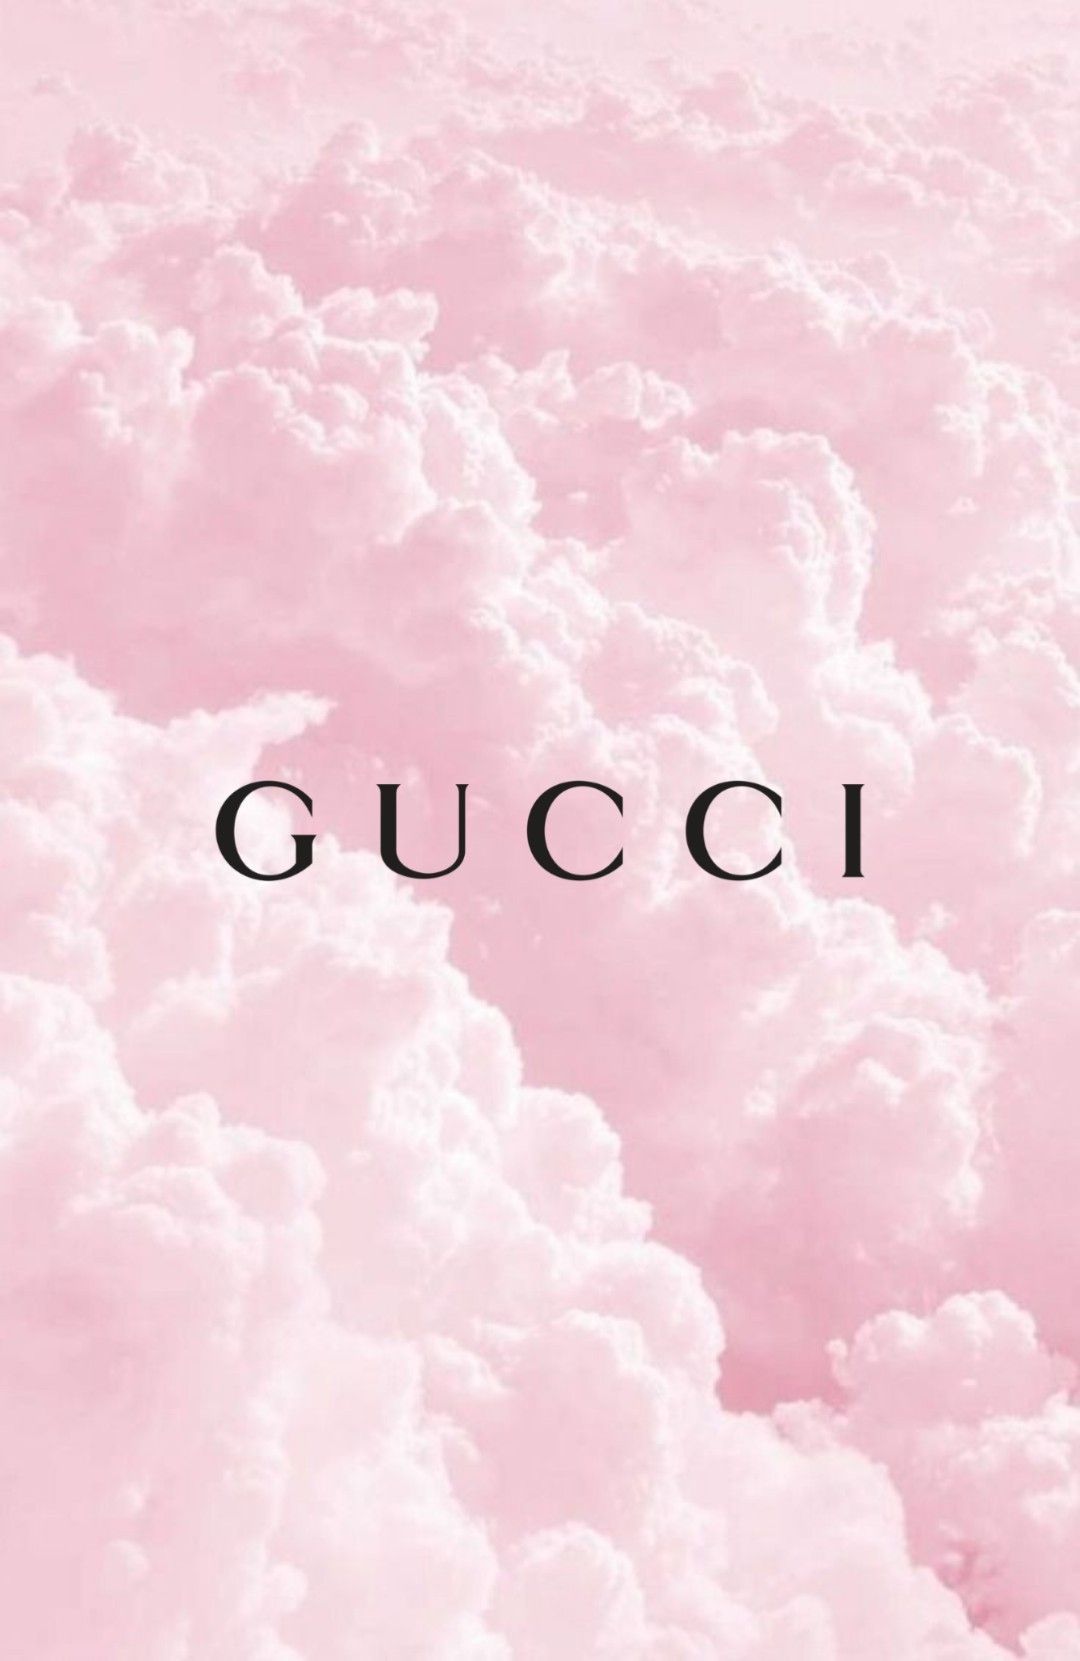 Cute Gucci Wallpapers Wallpapers